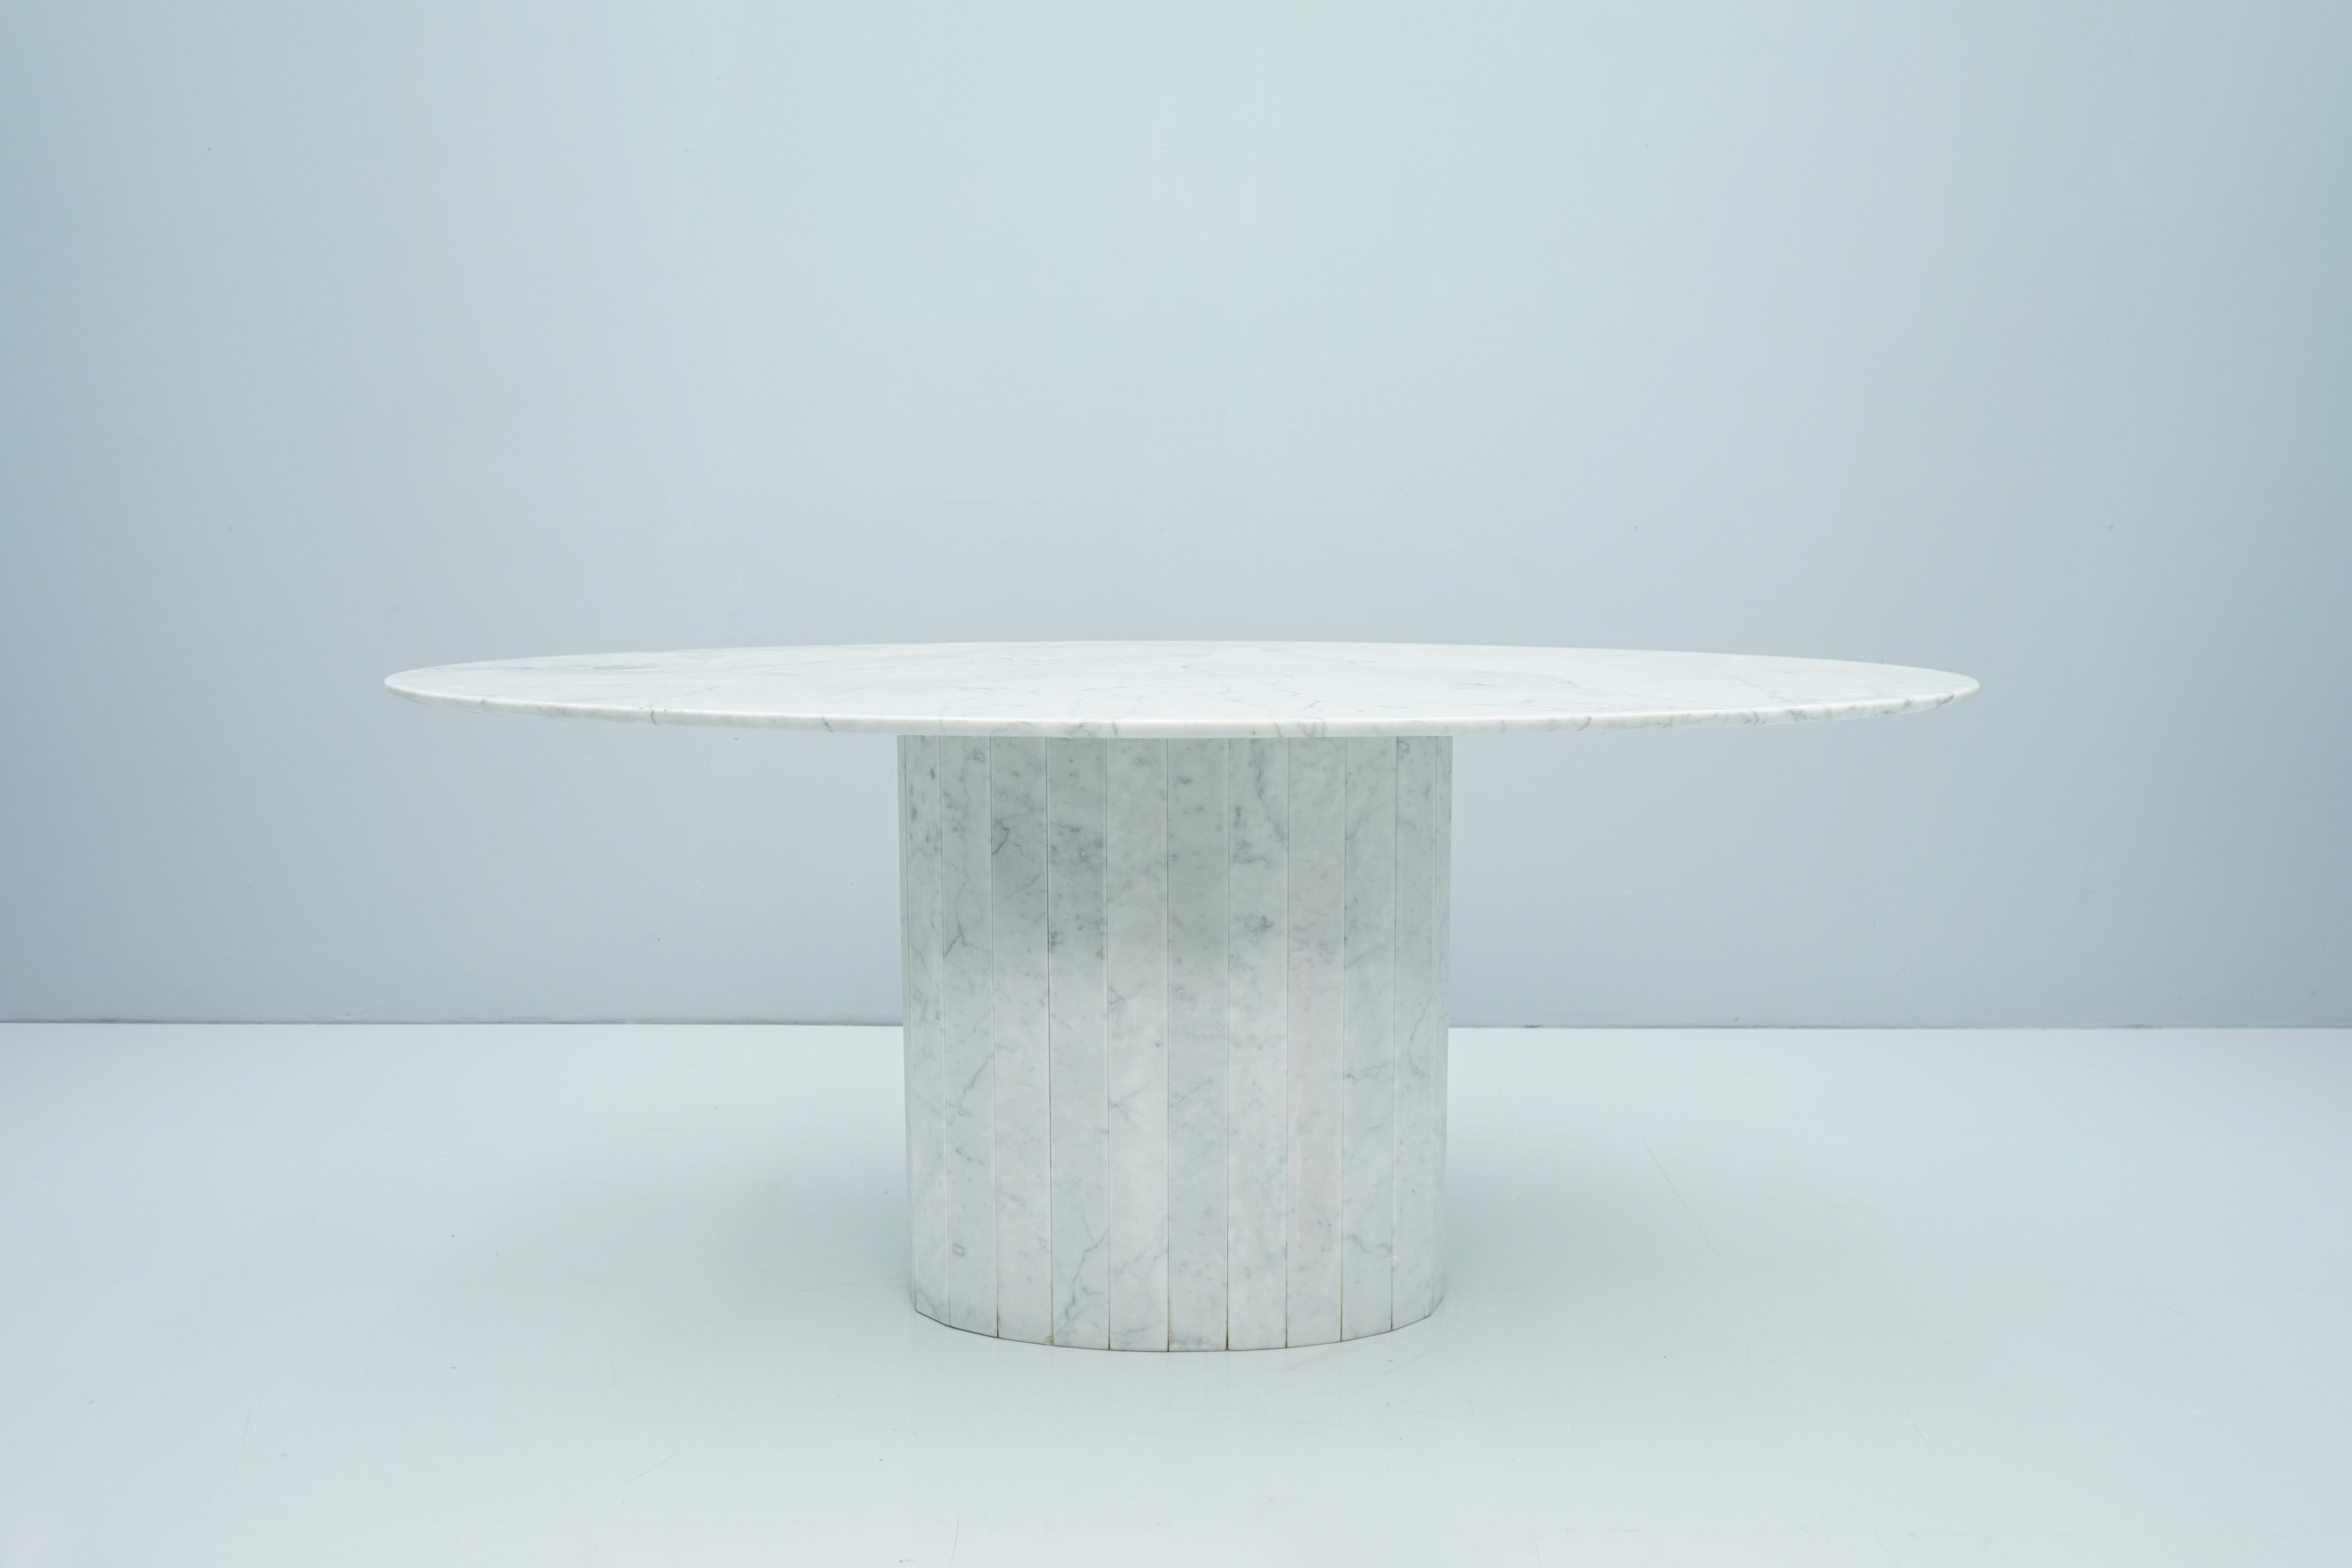 Beautiful oval dining table in white Carrara marble. The tabletop has been resealed and polished with epoxy resin. The table has no damage and no repairs. The table dates back to the 1970s and comes from Italy.
Measures: H 74 cm x W 180 cm x D 100